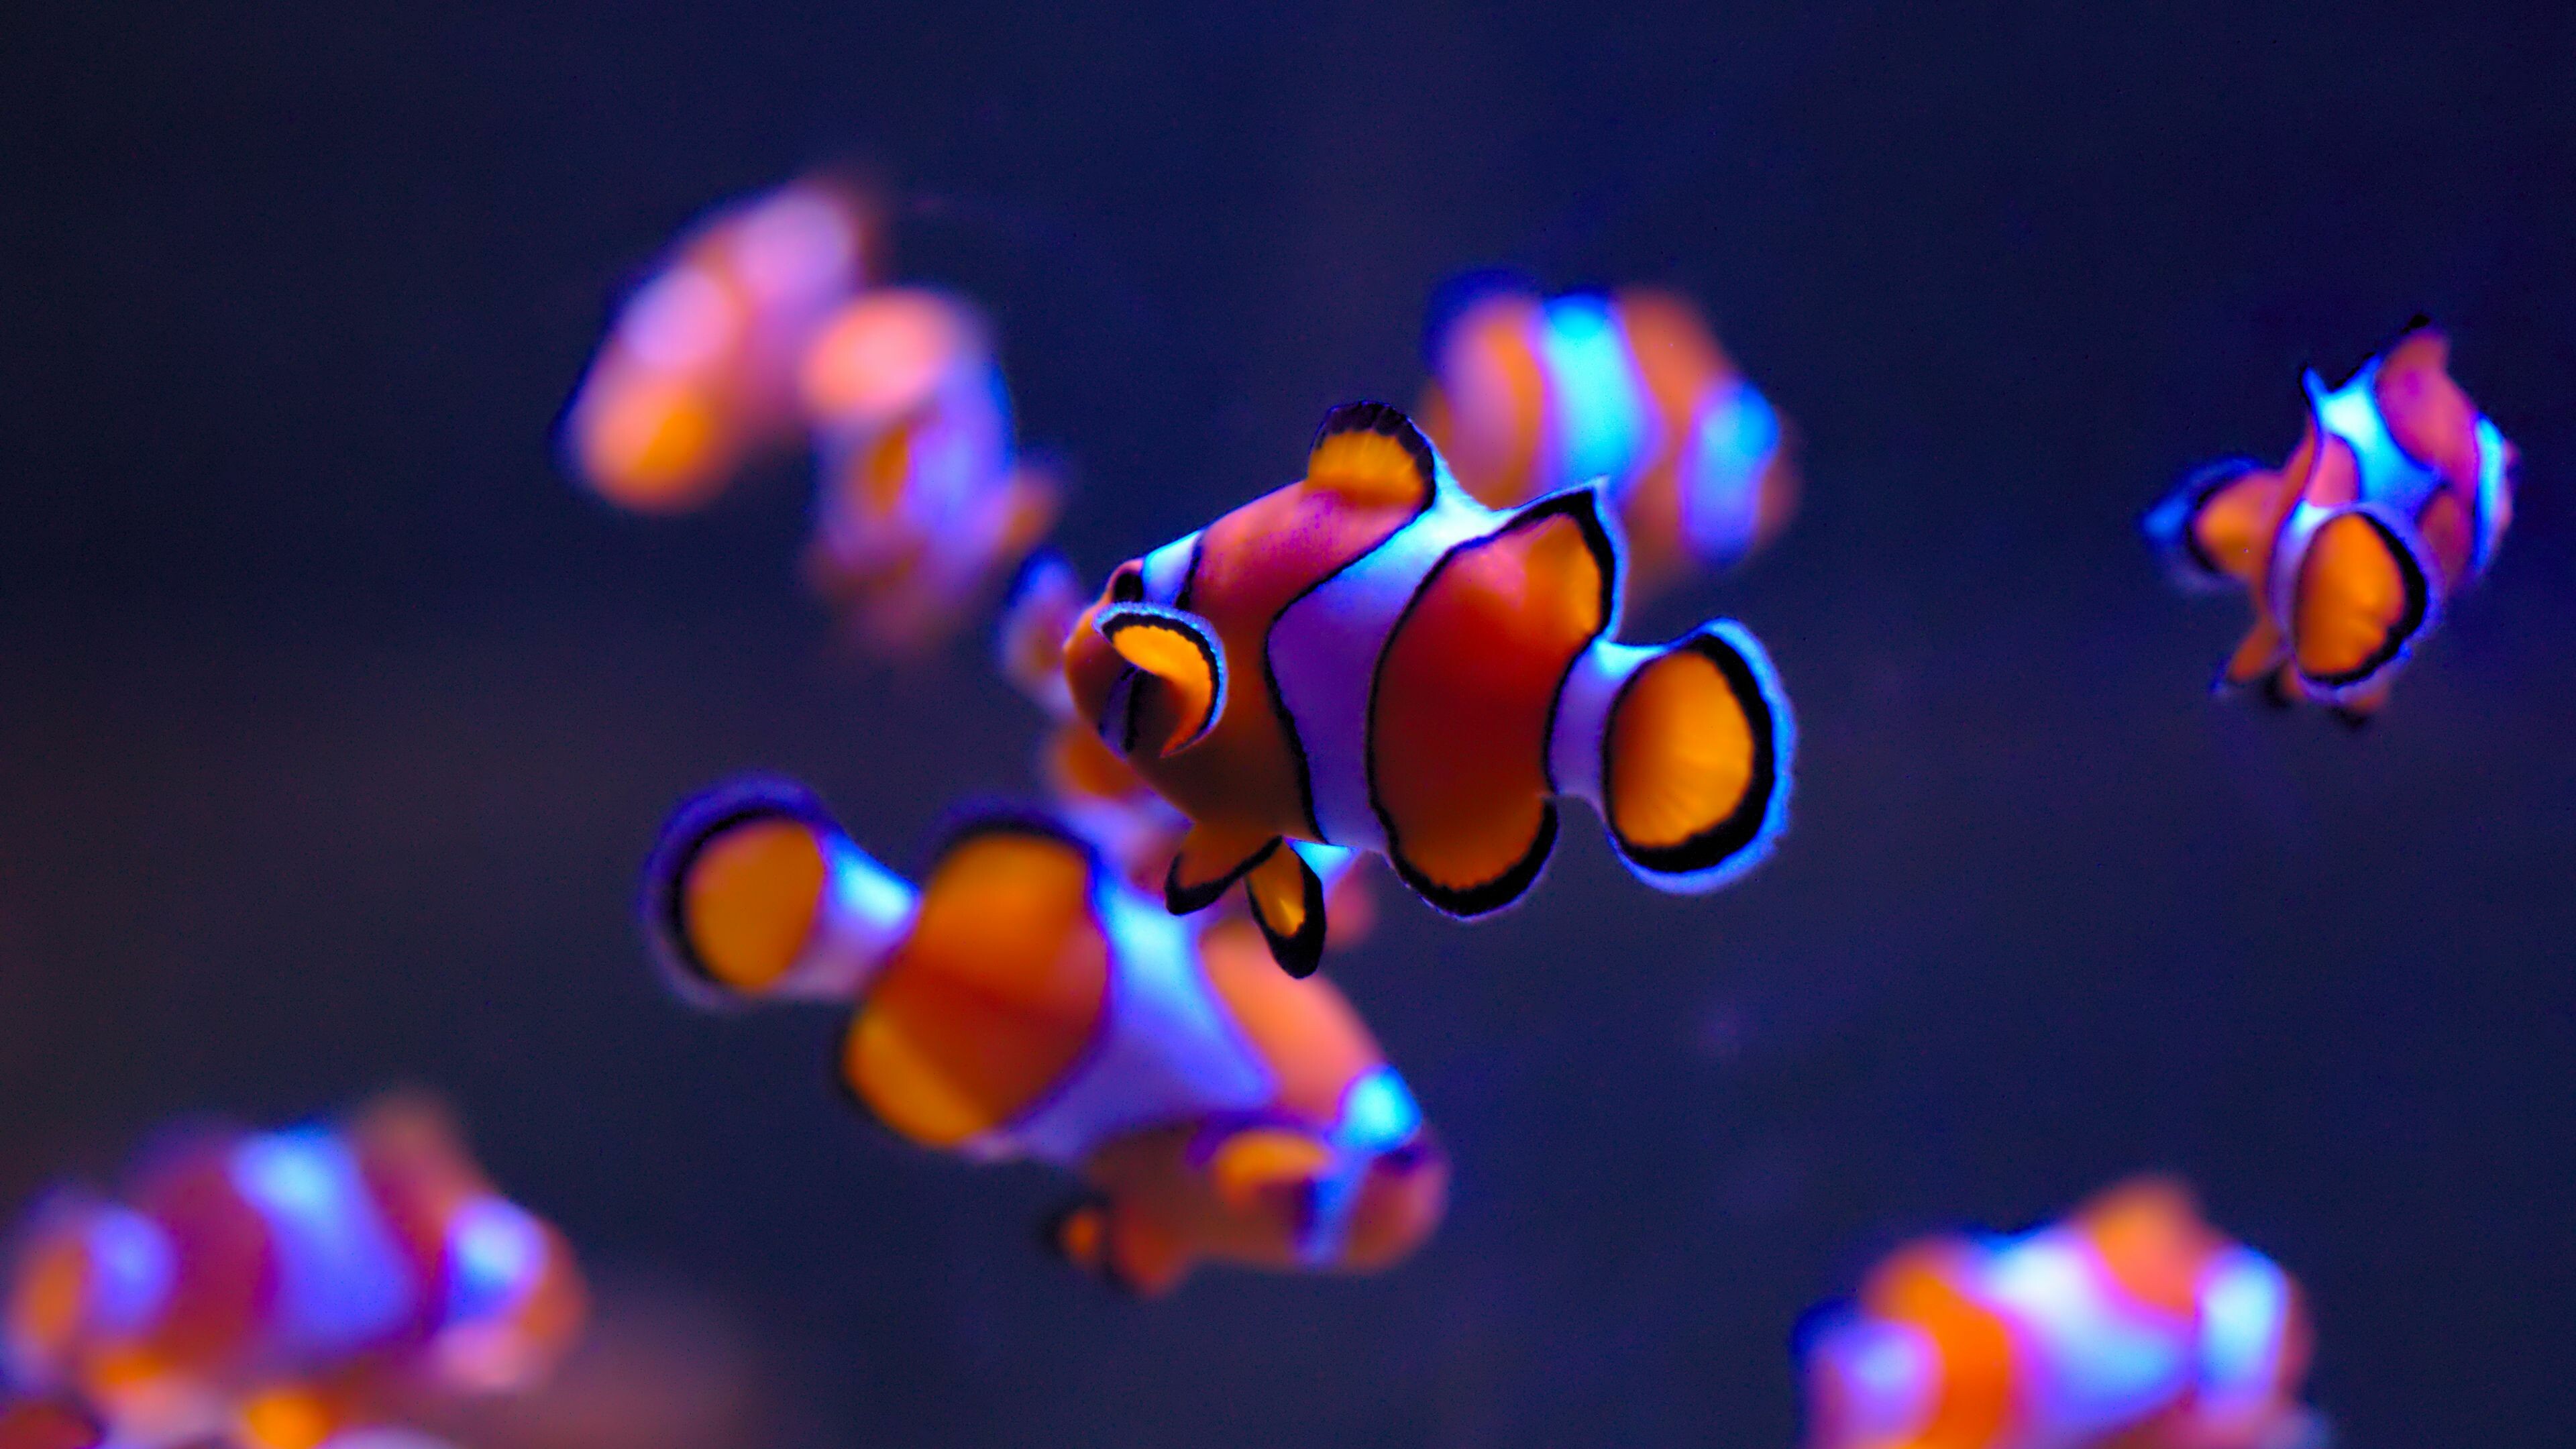 Fish 4K PC wallpapers, High-quality visuals, Vibrant and energetic, Perfect for desktops, 3840x2160 4K Desktop